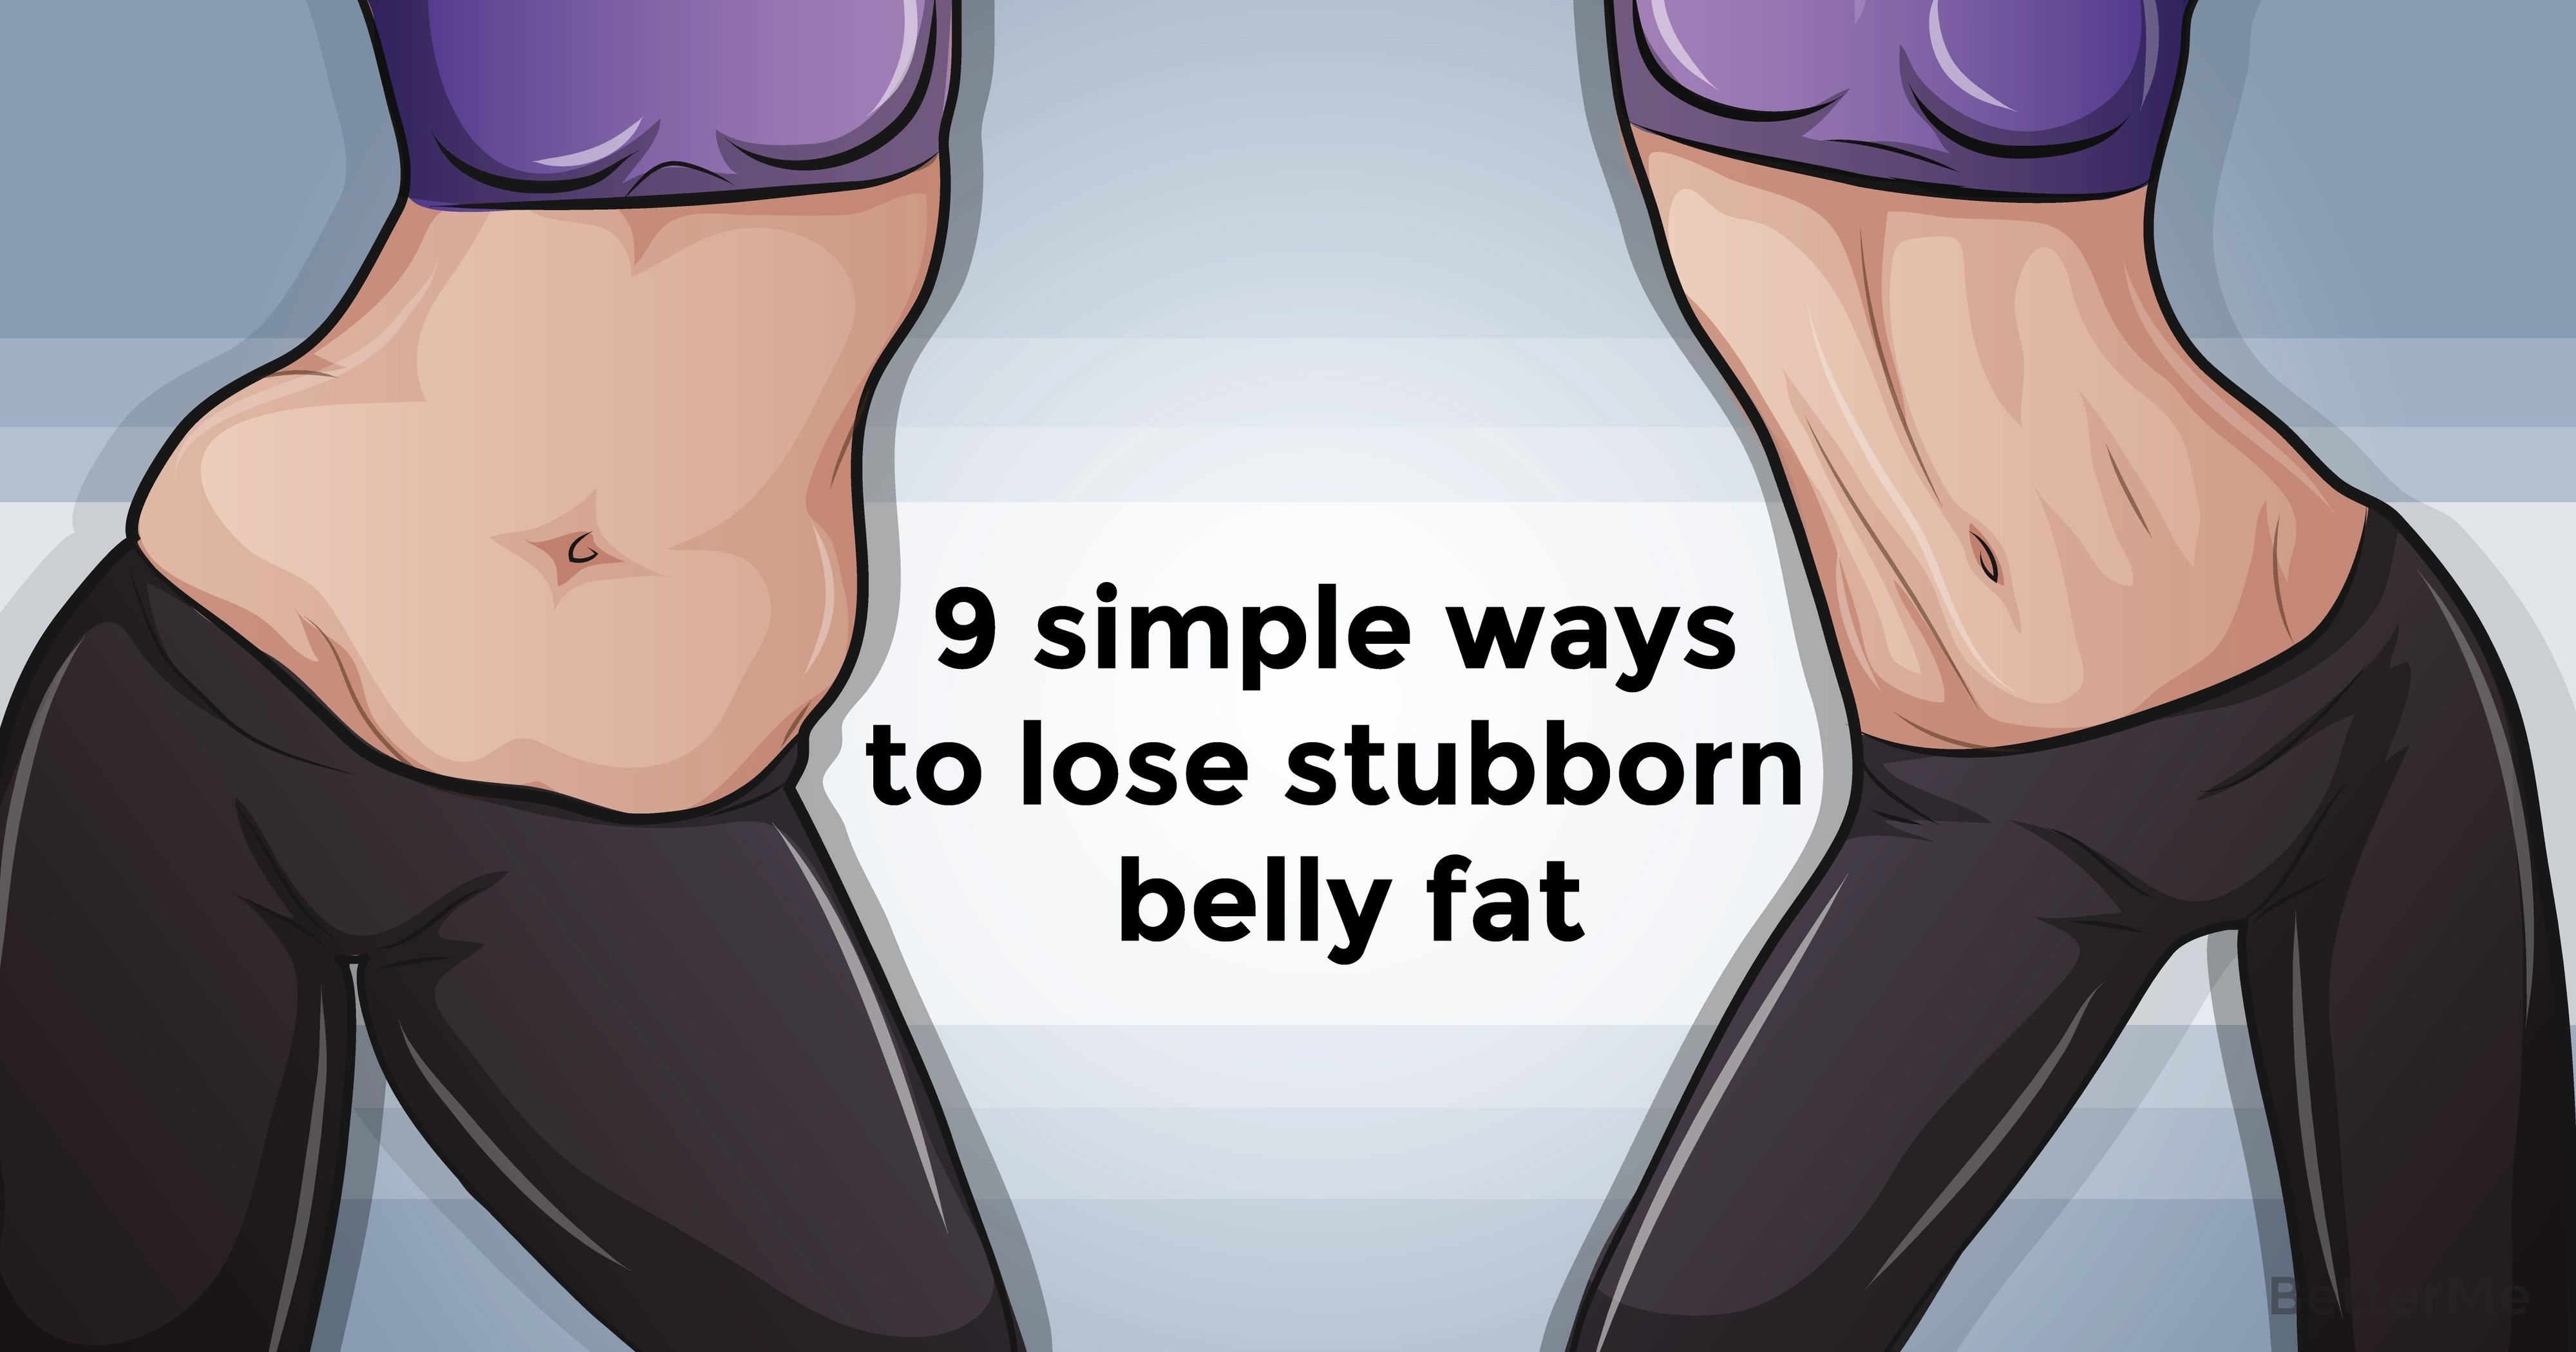 9 ways to lose stubborn belly fat